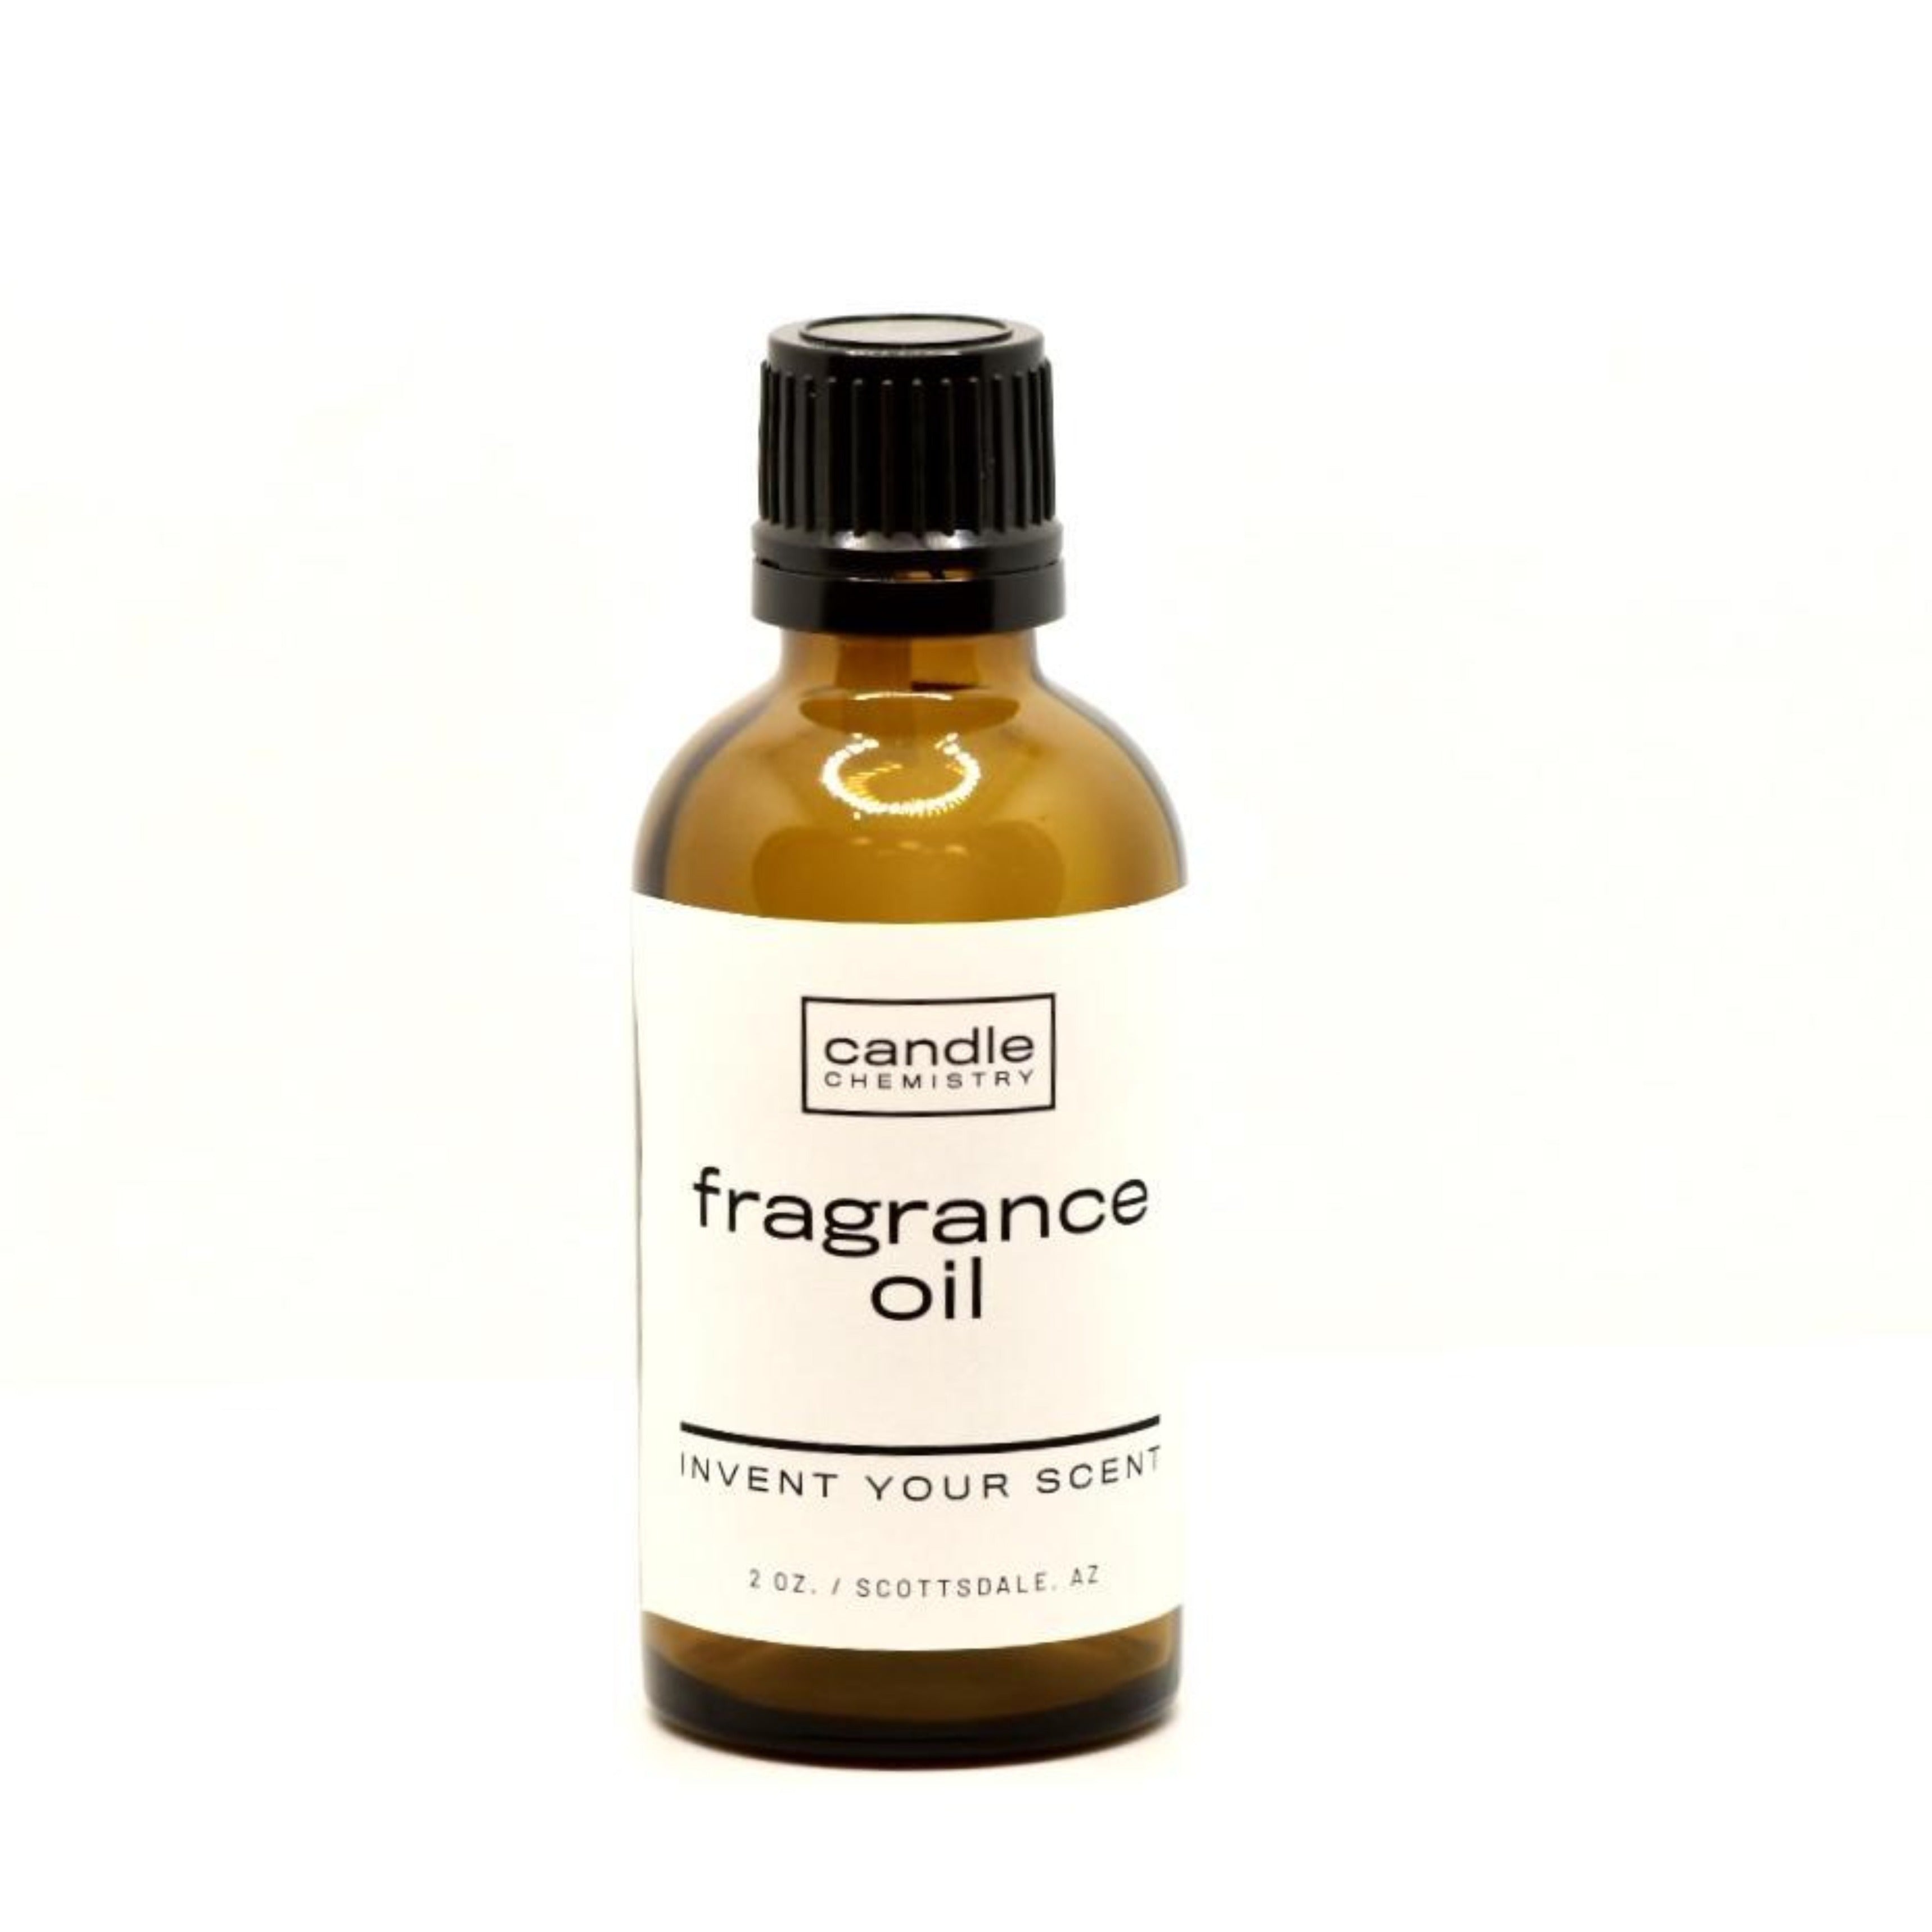 1/2 oz Fragrance Oil for oil burners | Candle Warmer fragrance Oil |  Scented Oil | Scent burning oil | Candle Warmer Not Included